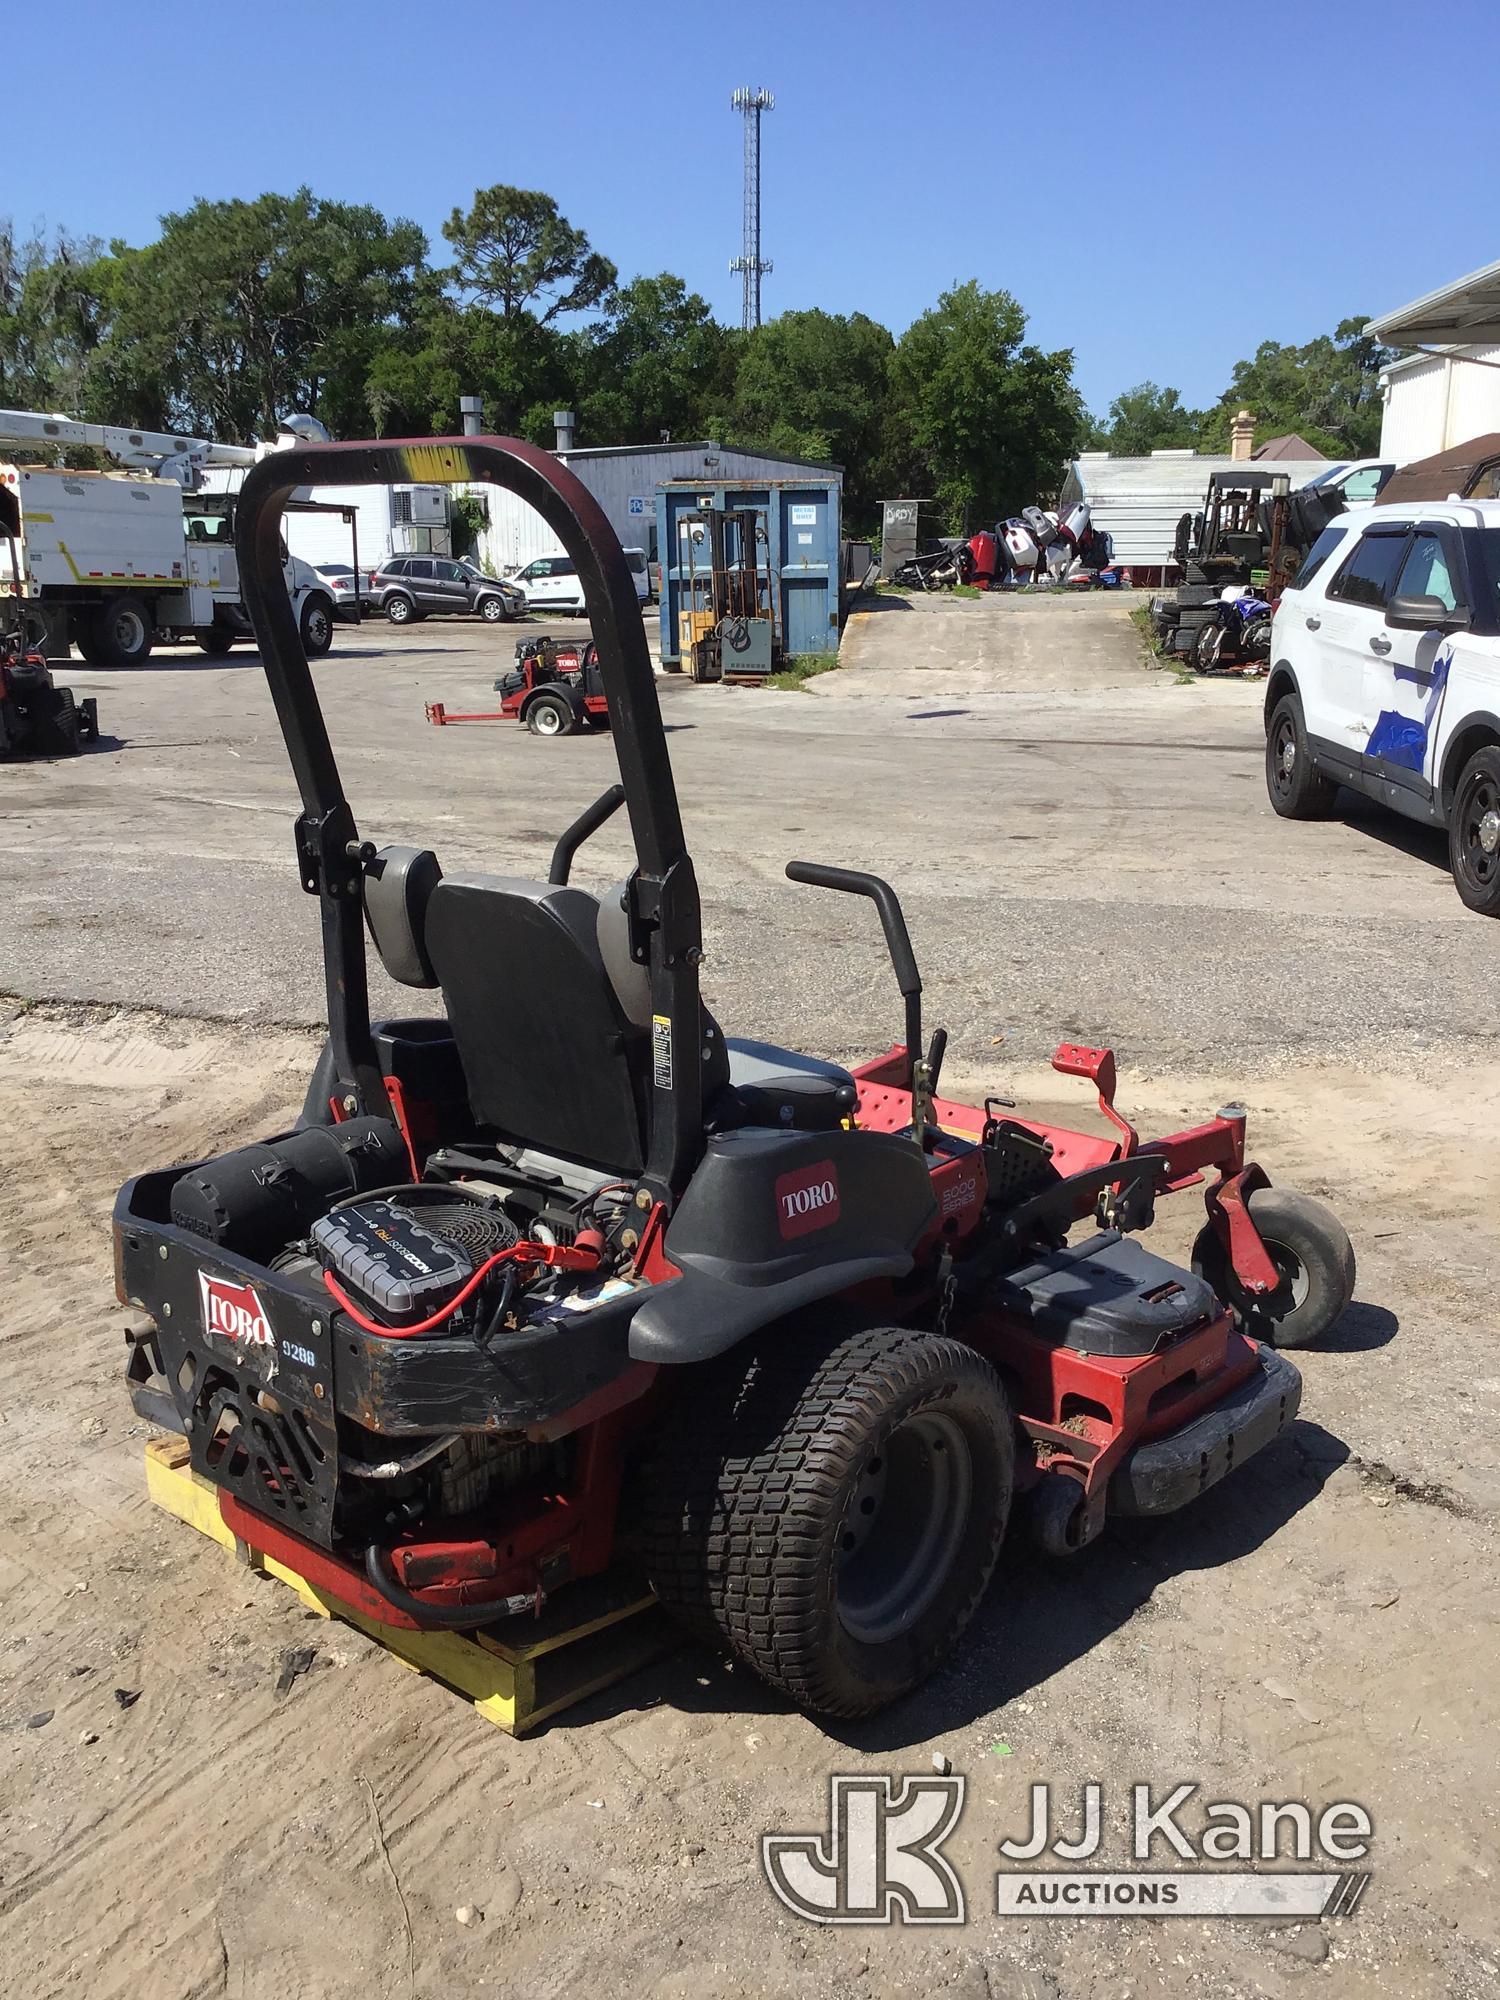 (Ocala, FL) 2015 Toro Z5000 Lawn Mower Engine Turns Over Does Not Run, Condition Unknown.